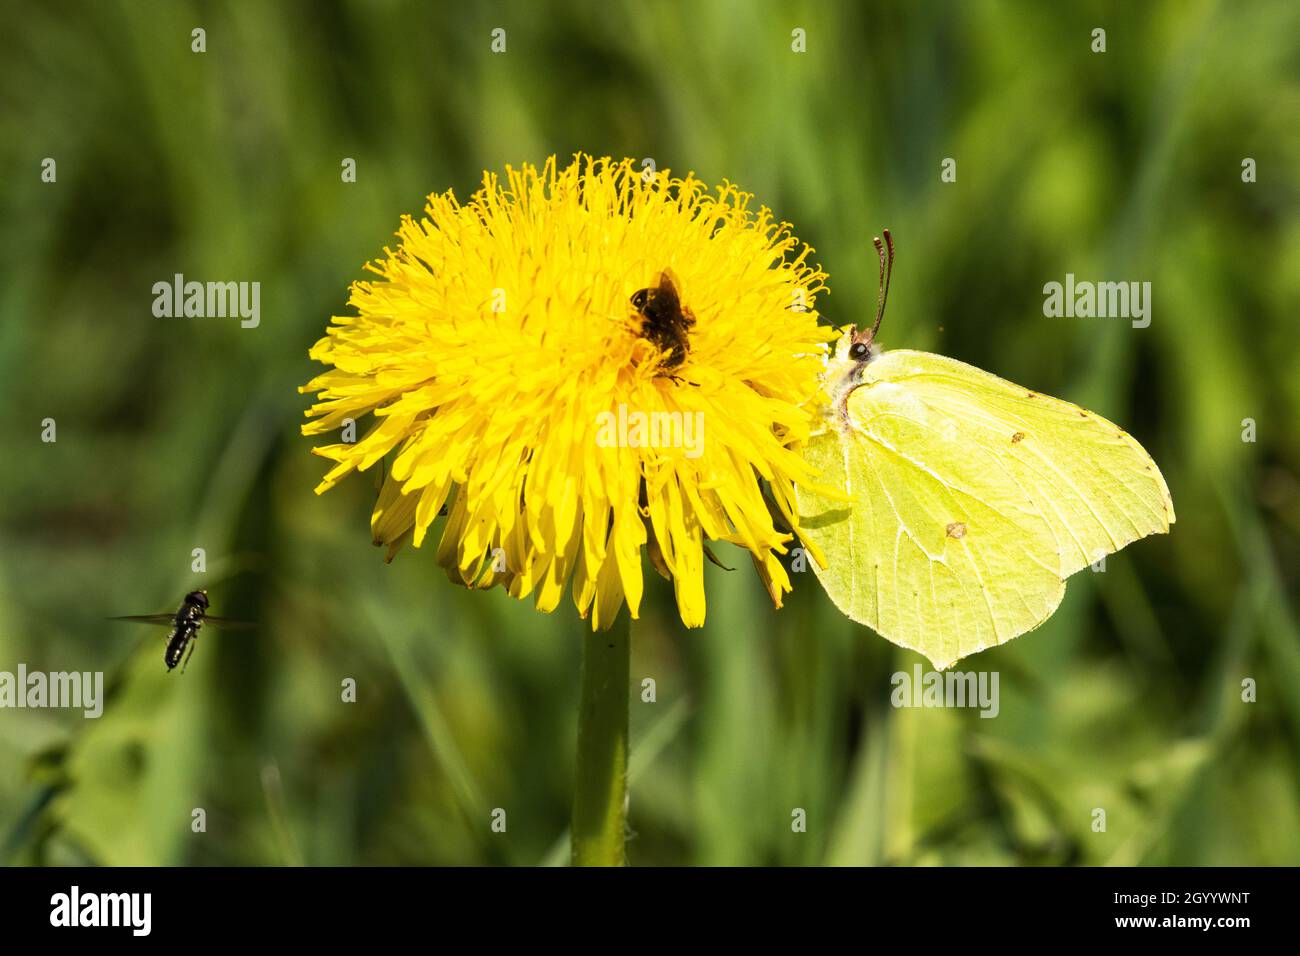 Brimstone butterfly, Gonepteryx rhamni collecting nectar from a blooming weed Common dandelion, Taraxacum officinale. Stock Photo